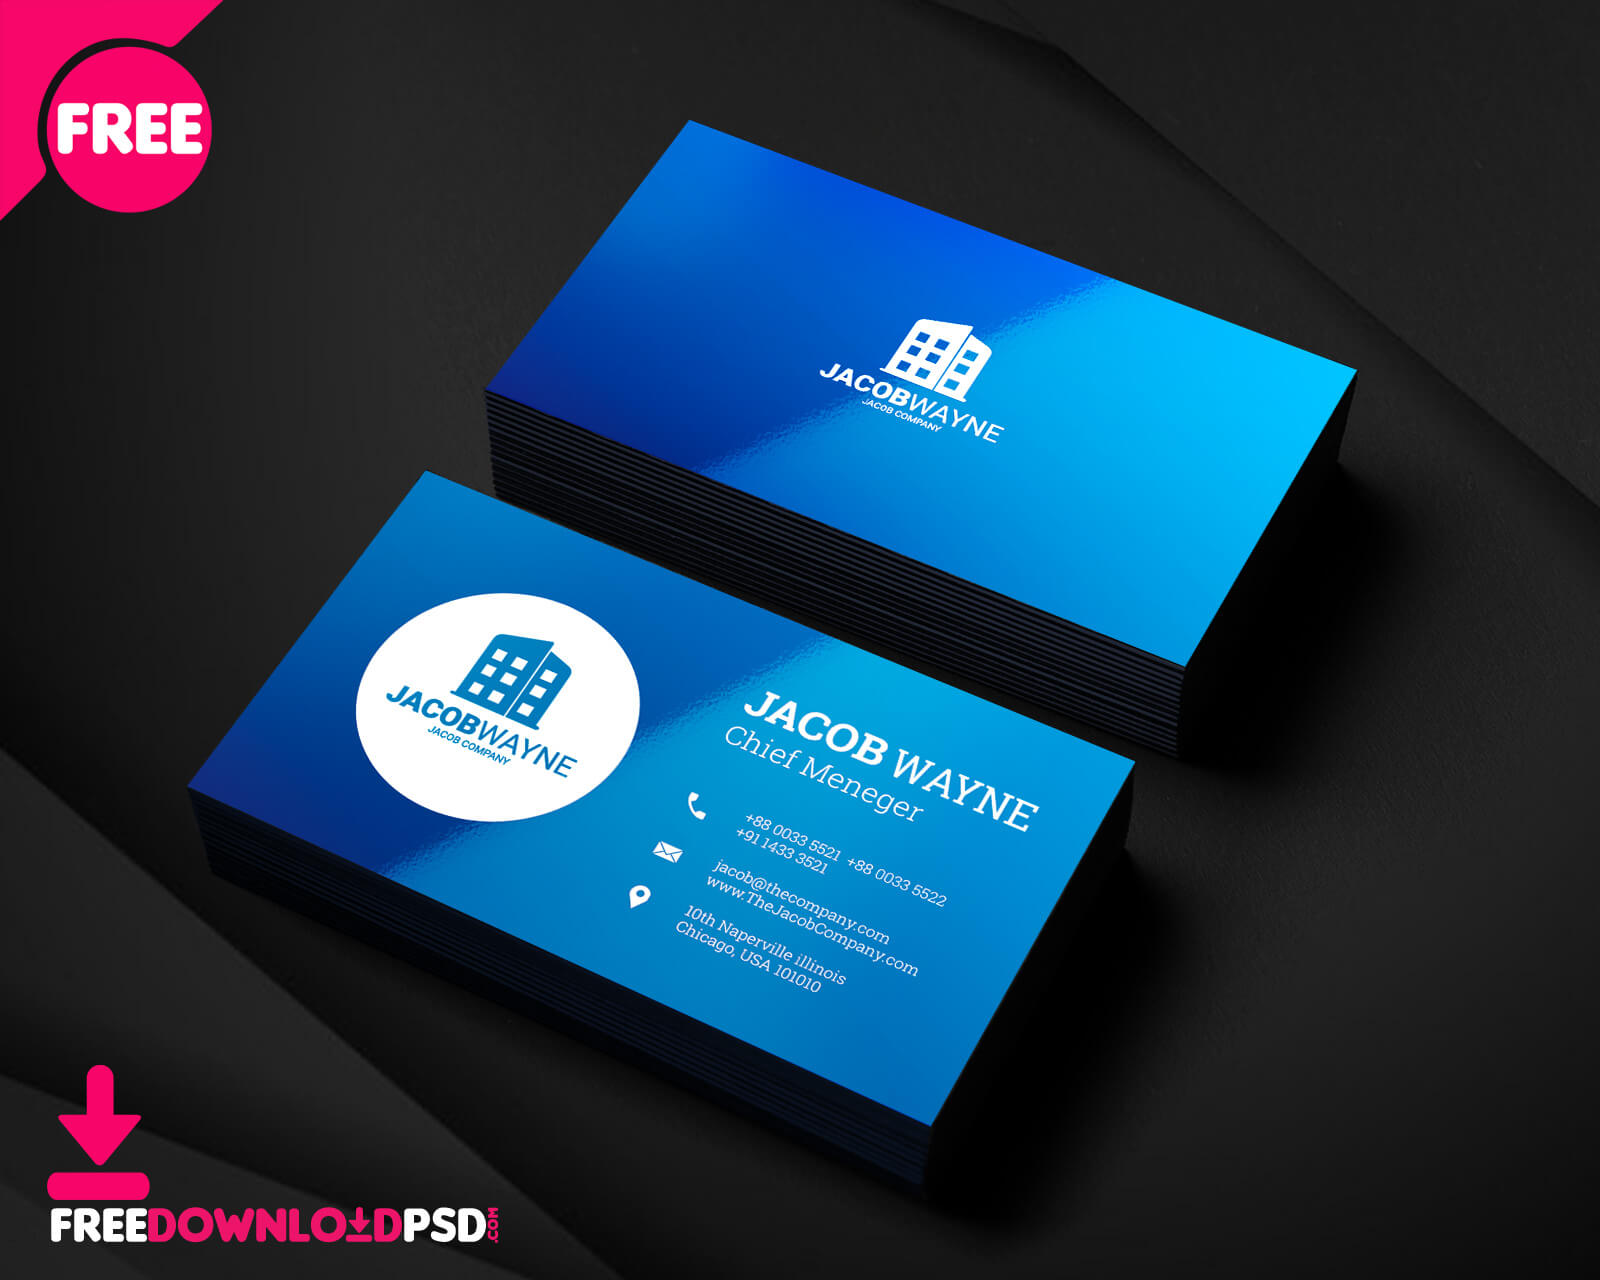 Real Estate Business Card Psd | Freedownloadpsd Inside Calling Card Psd Template